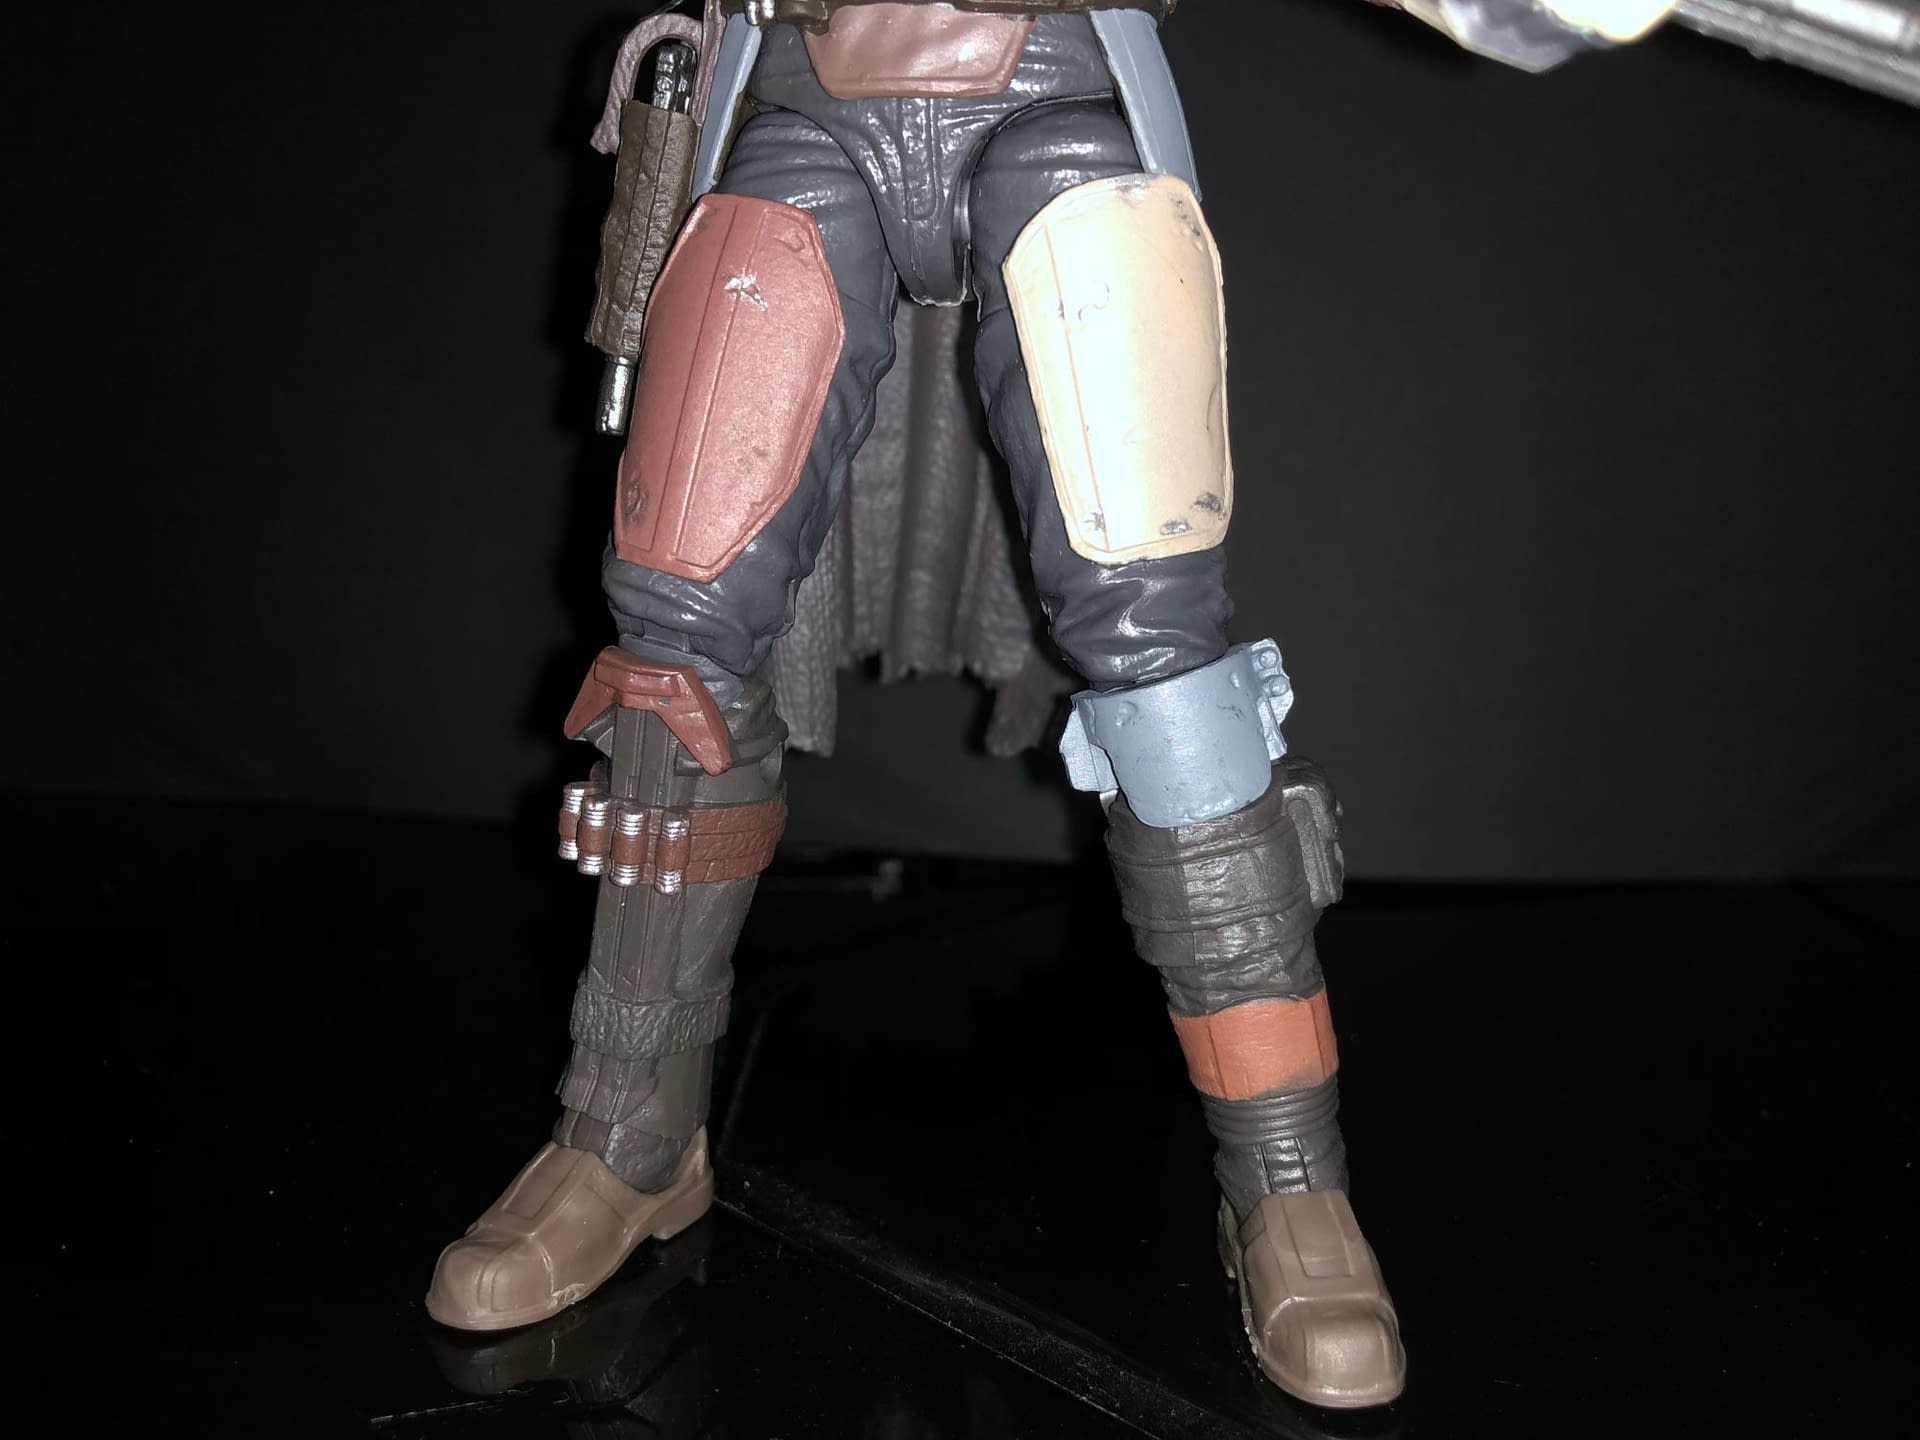 The Mandalorian Is In Our Sights For Our Next Bounty [Review]